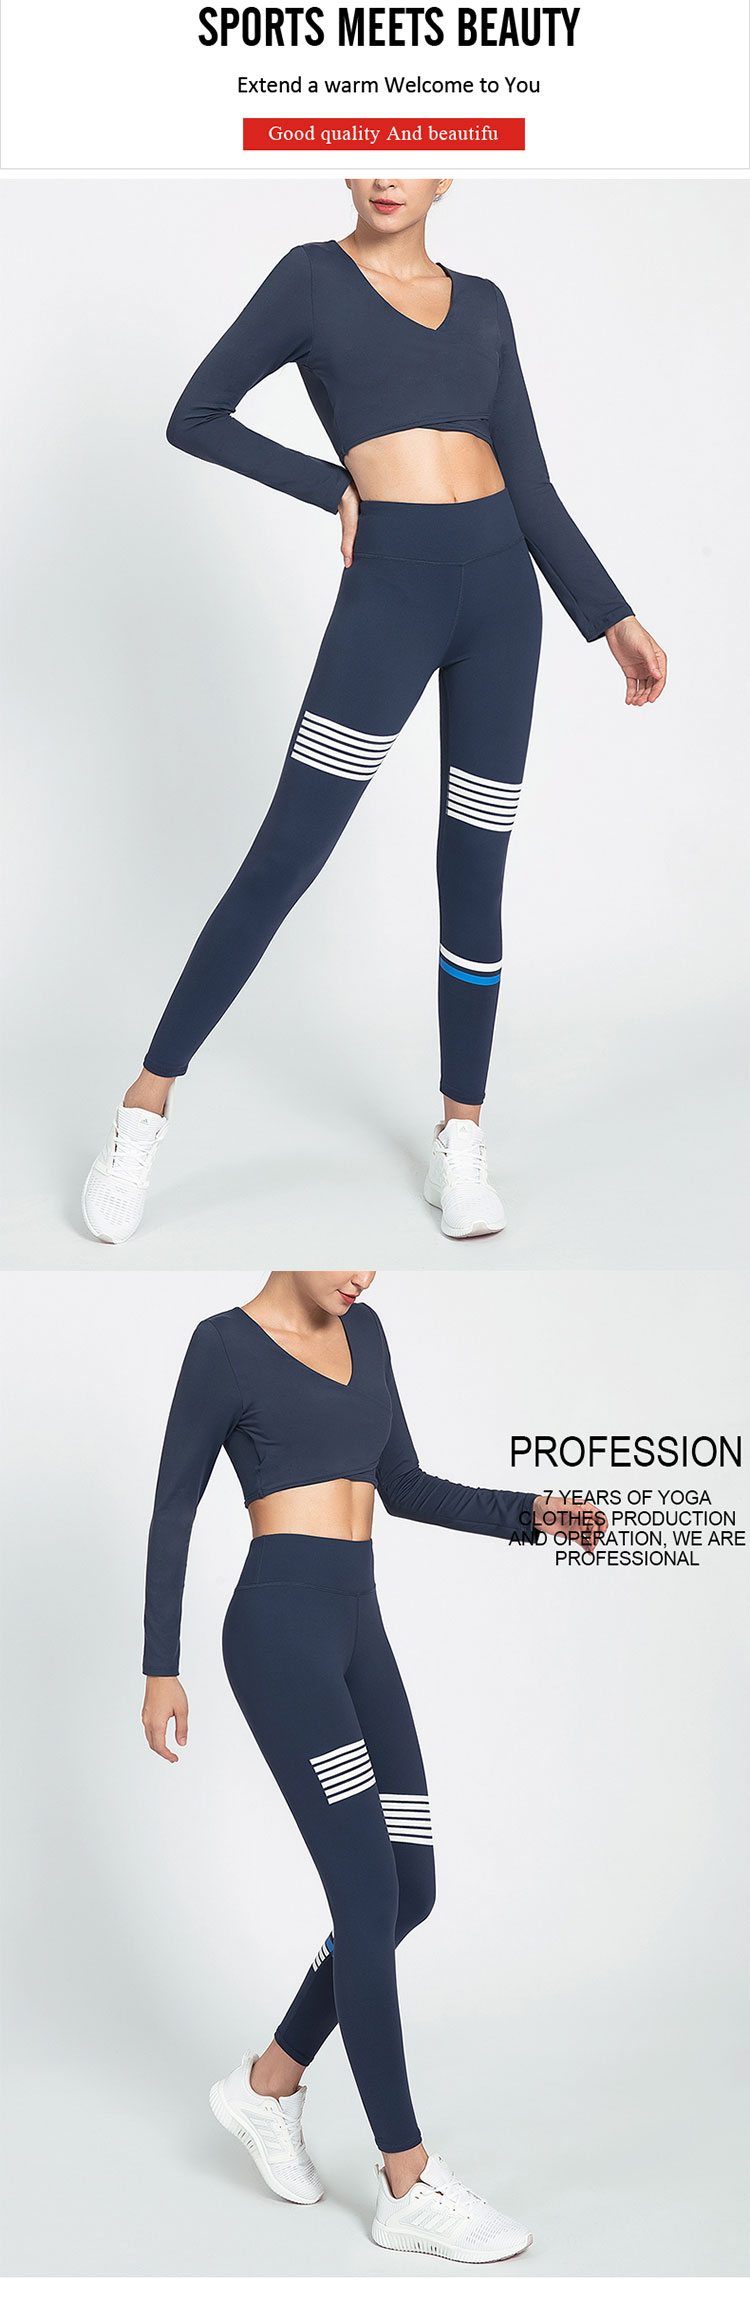 Black-sports-leggings-are-a-dynamic-style-for-the-young-market